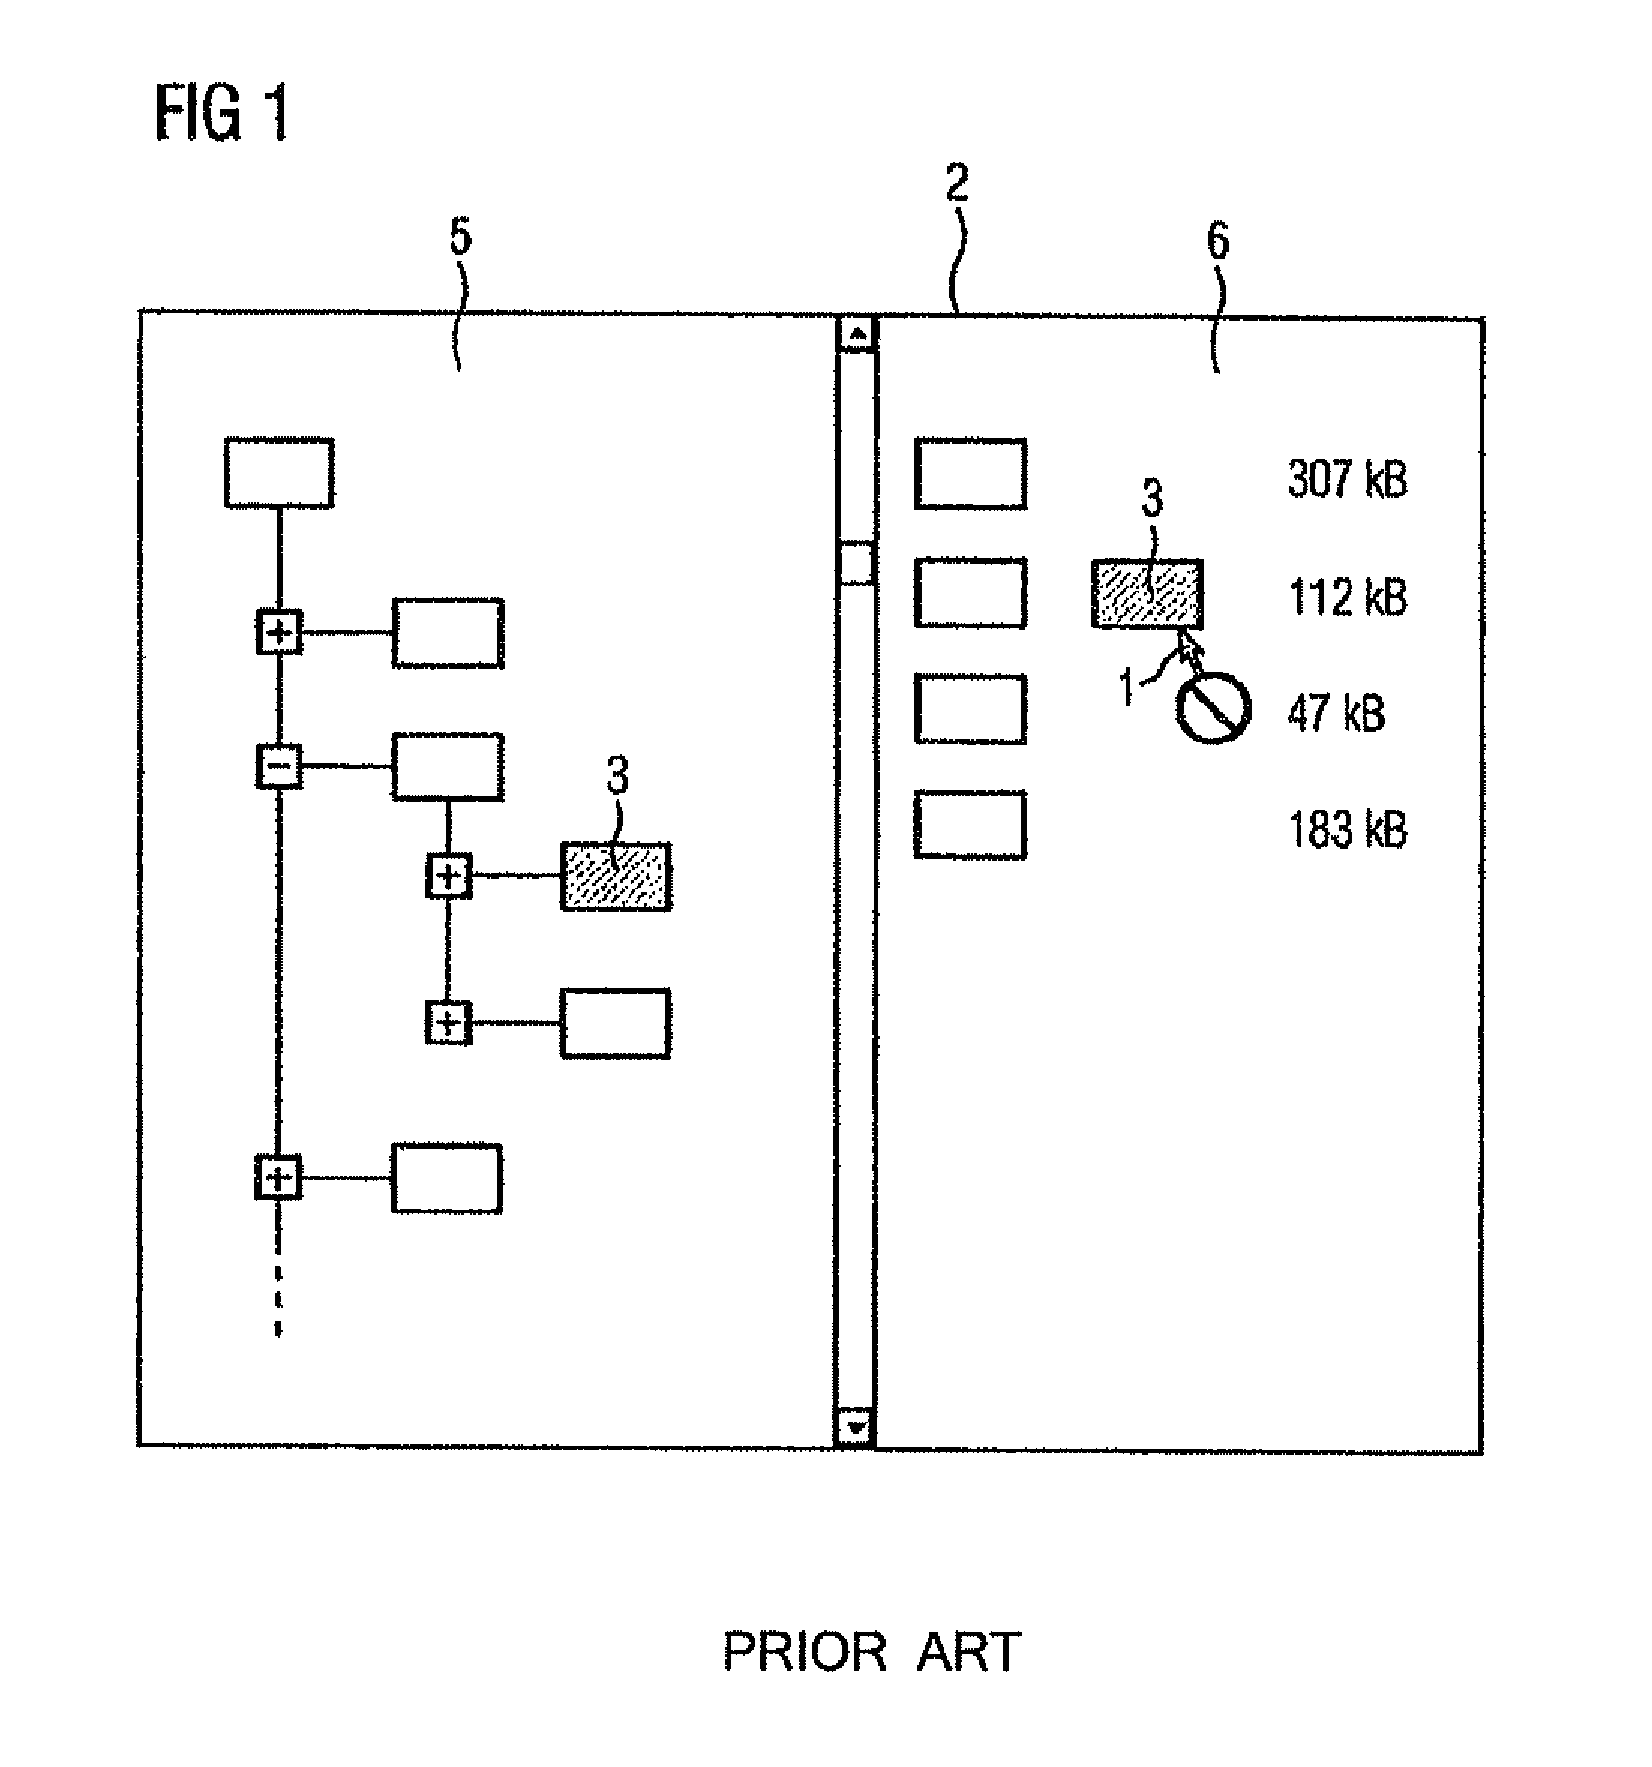 Method, device and computer program product for providing user information within a graphical user interface